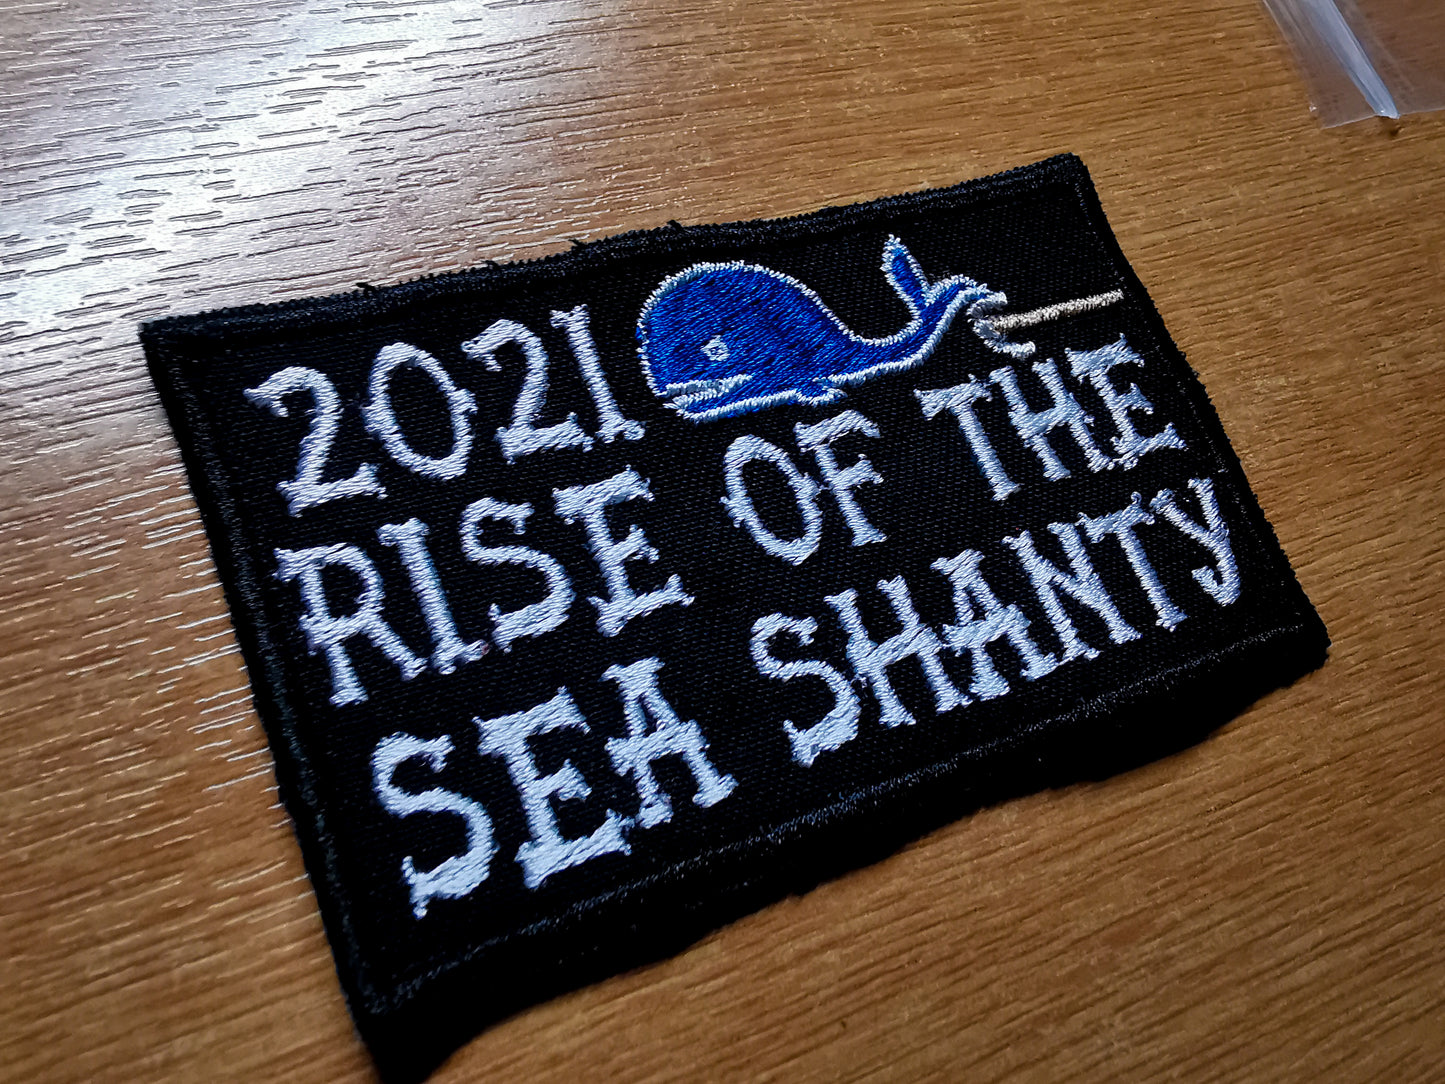 Sea Shanty Embroidered Patch Commemorative Rise of the Sea Shanty 2021